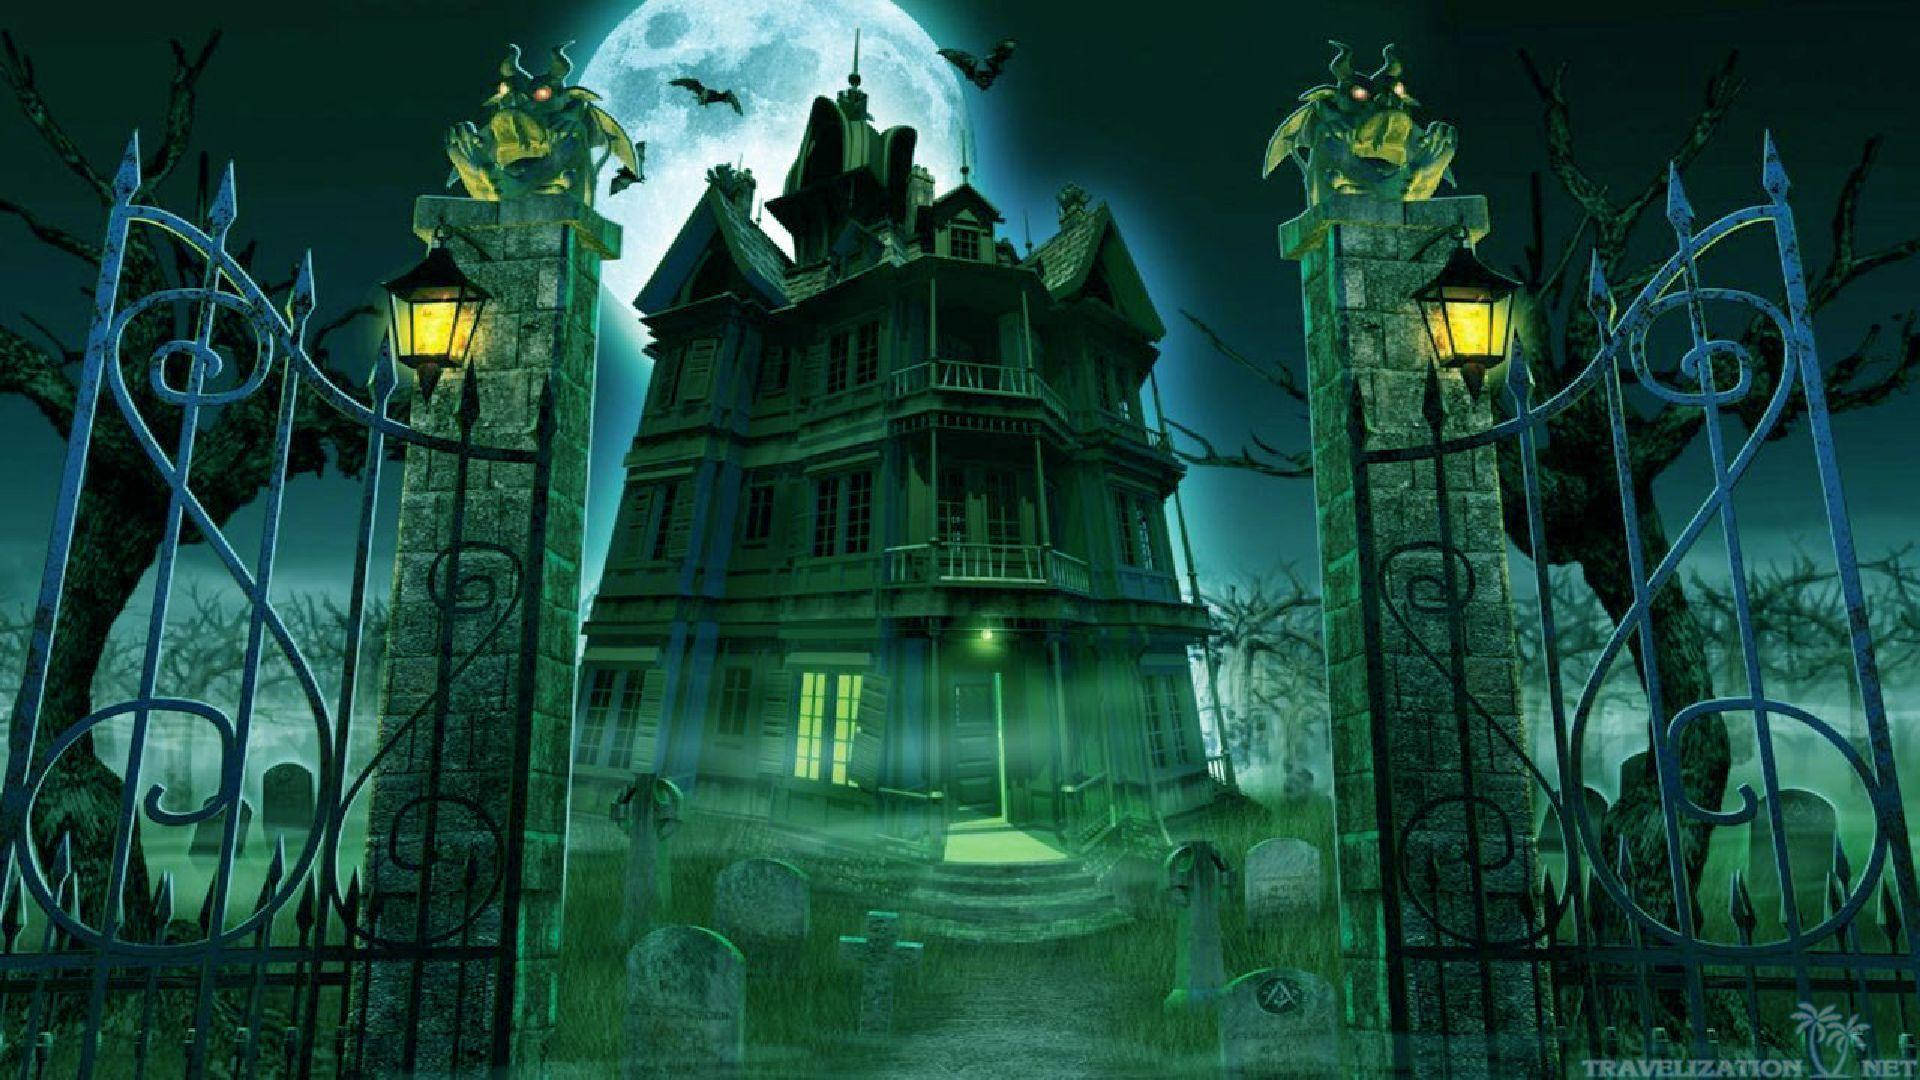 Visit The Old Haunted House On Halloween Wallpaper